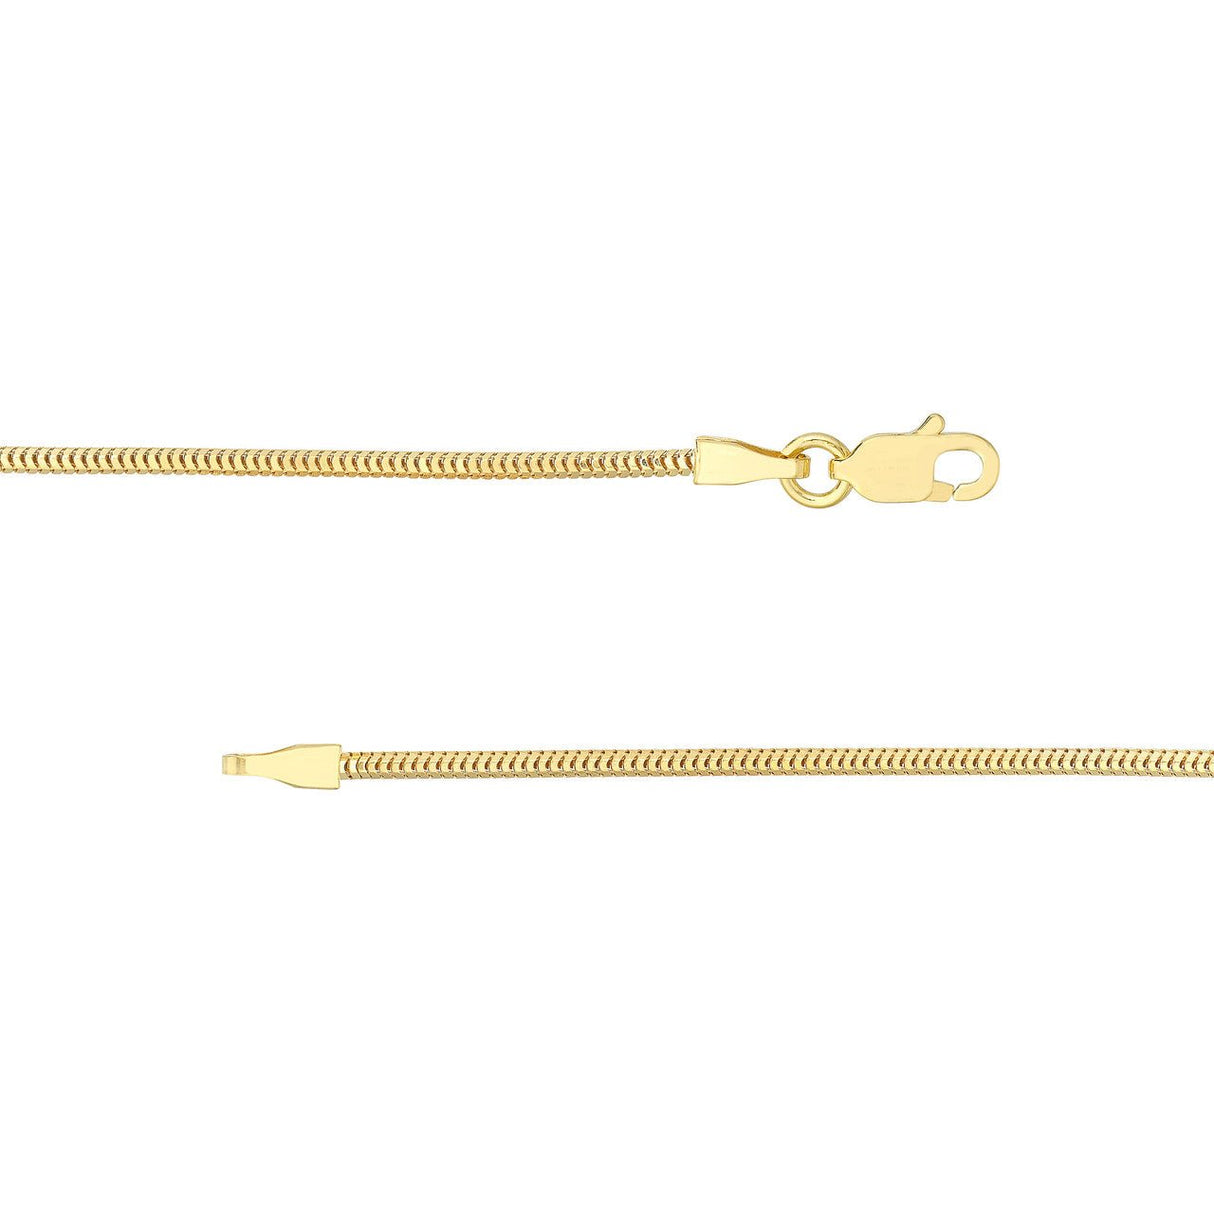 10K Gold Chain, 18",1.4mm Snake Chain with Lobster Lock, Gold Chain Necklace, - Diamond Origin